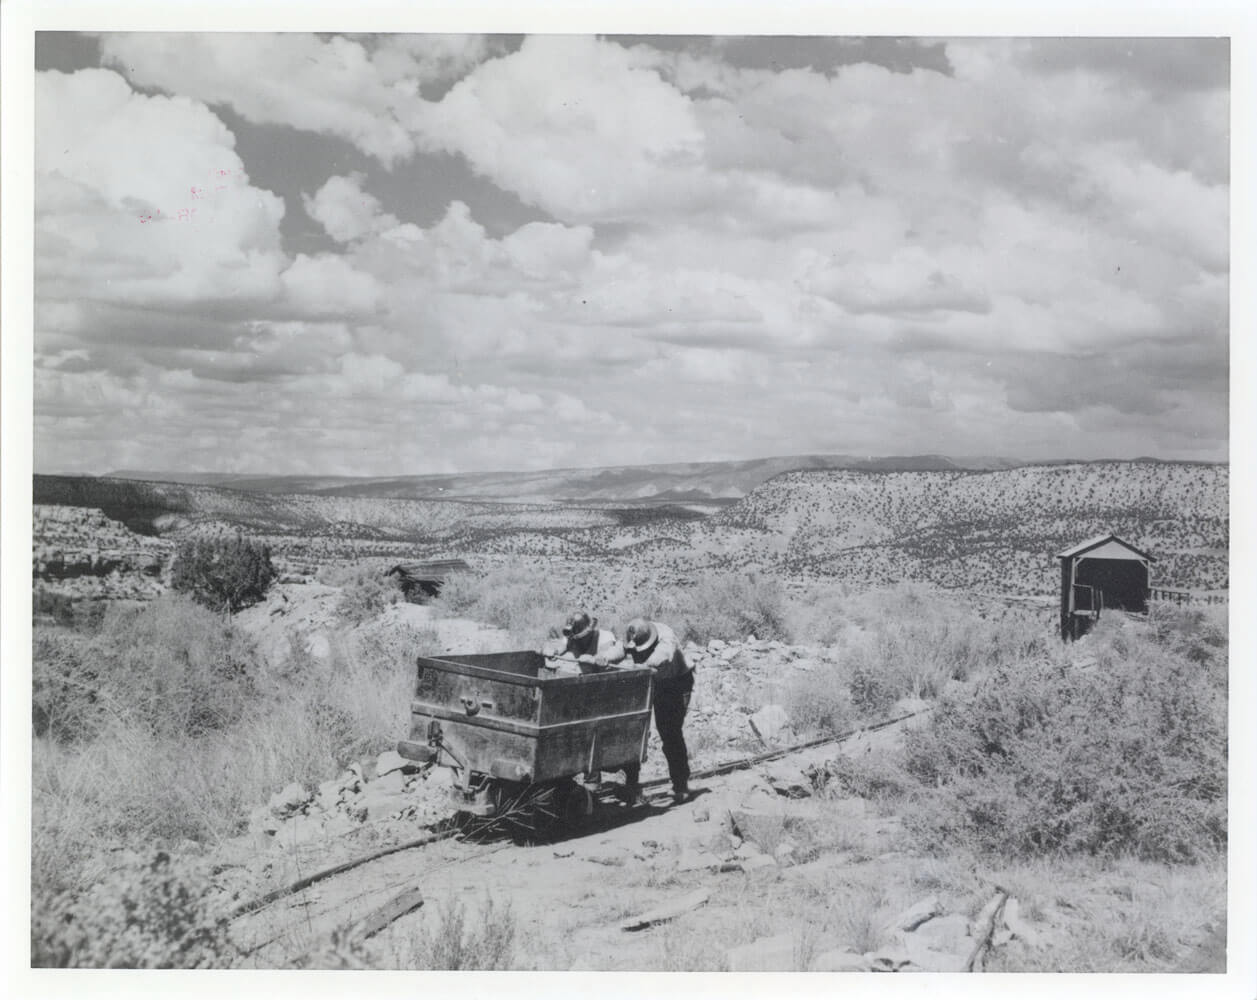 Uranium mining on the Colorado Plateau during the 1950's boom. William Chenoweth Collection, Museums of Western Colorado.